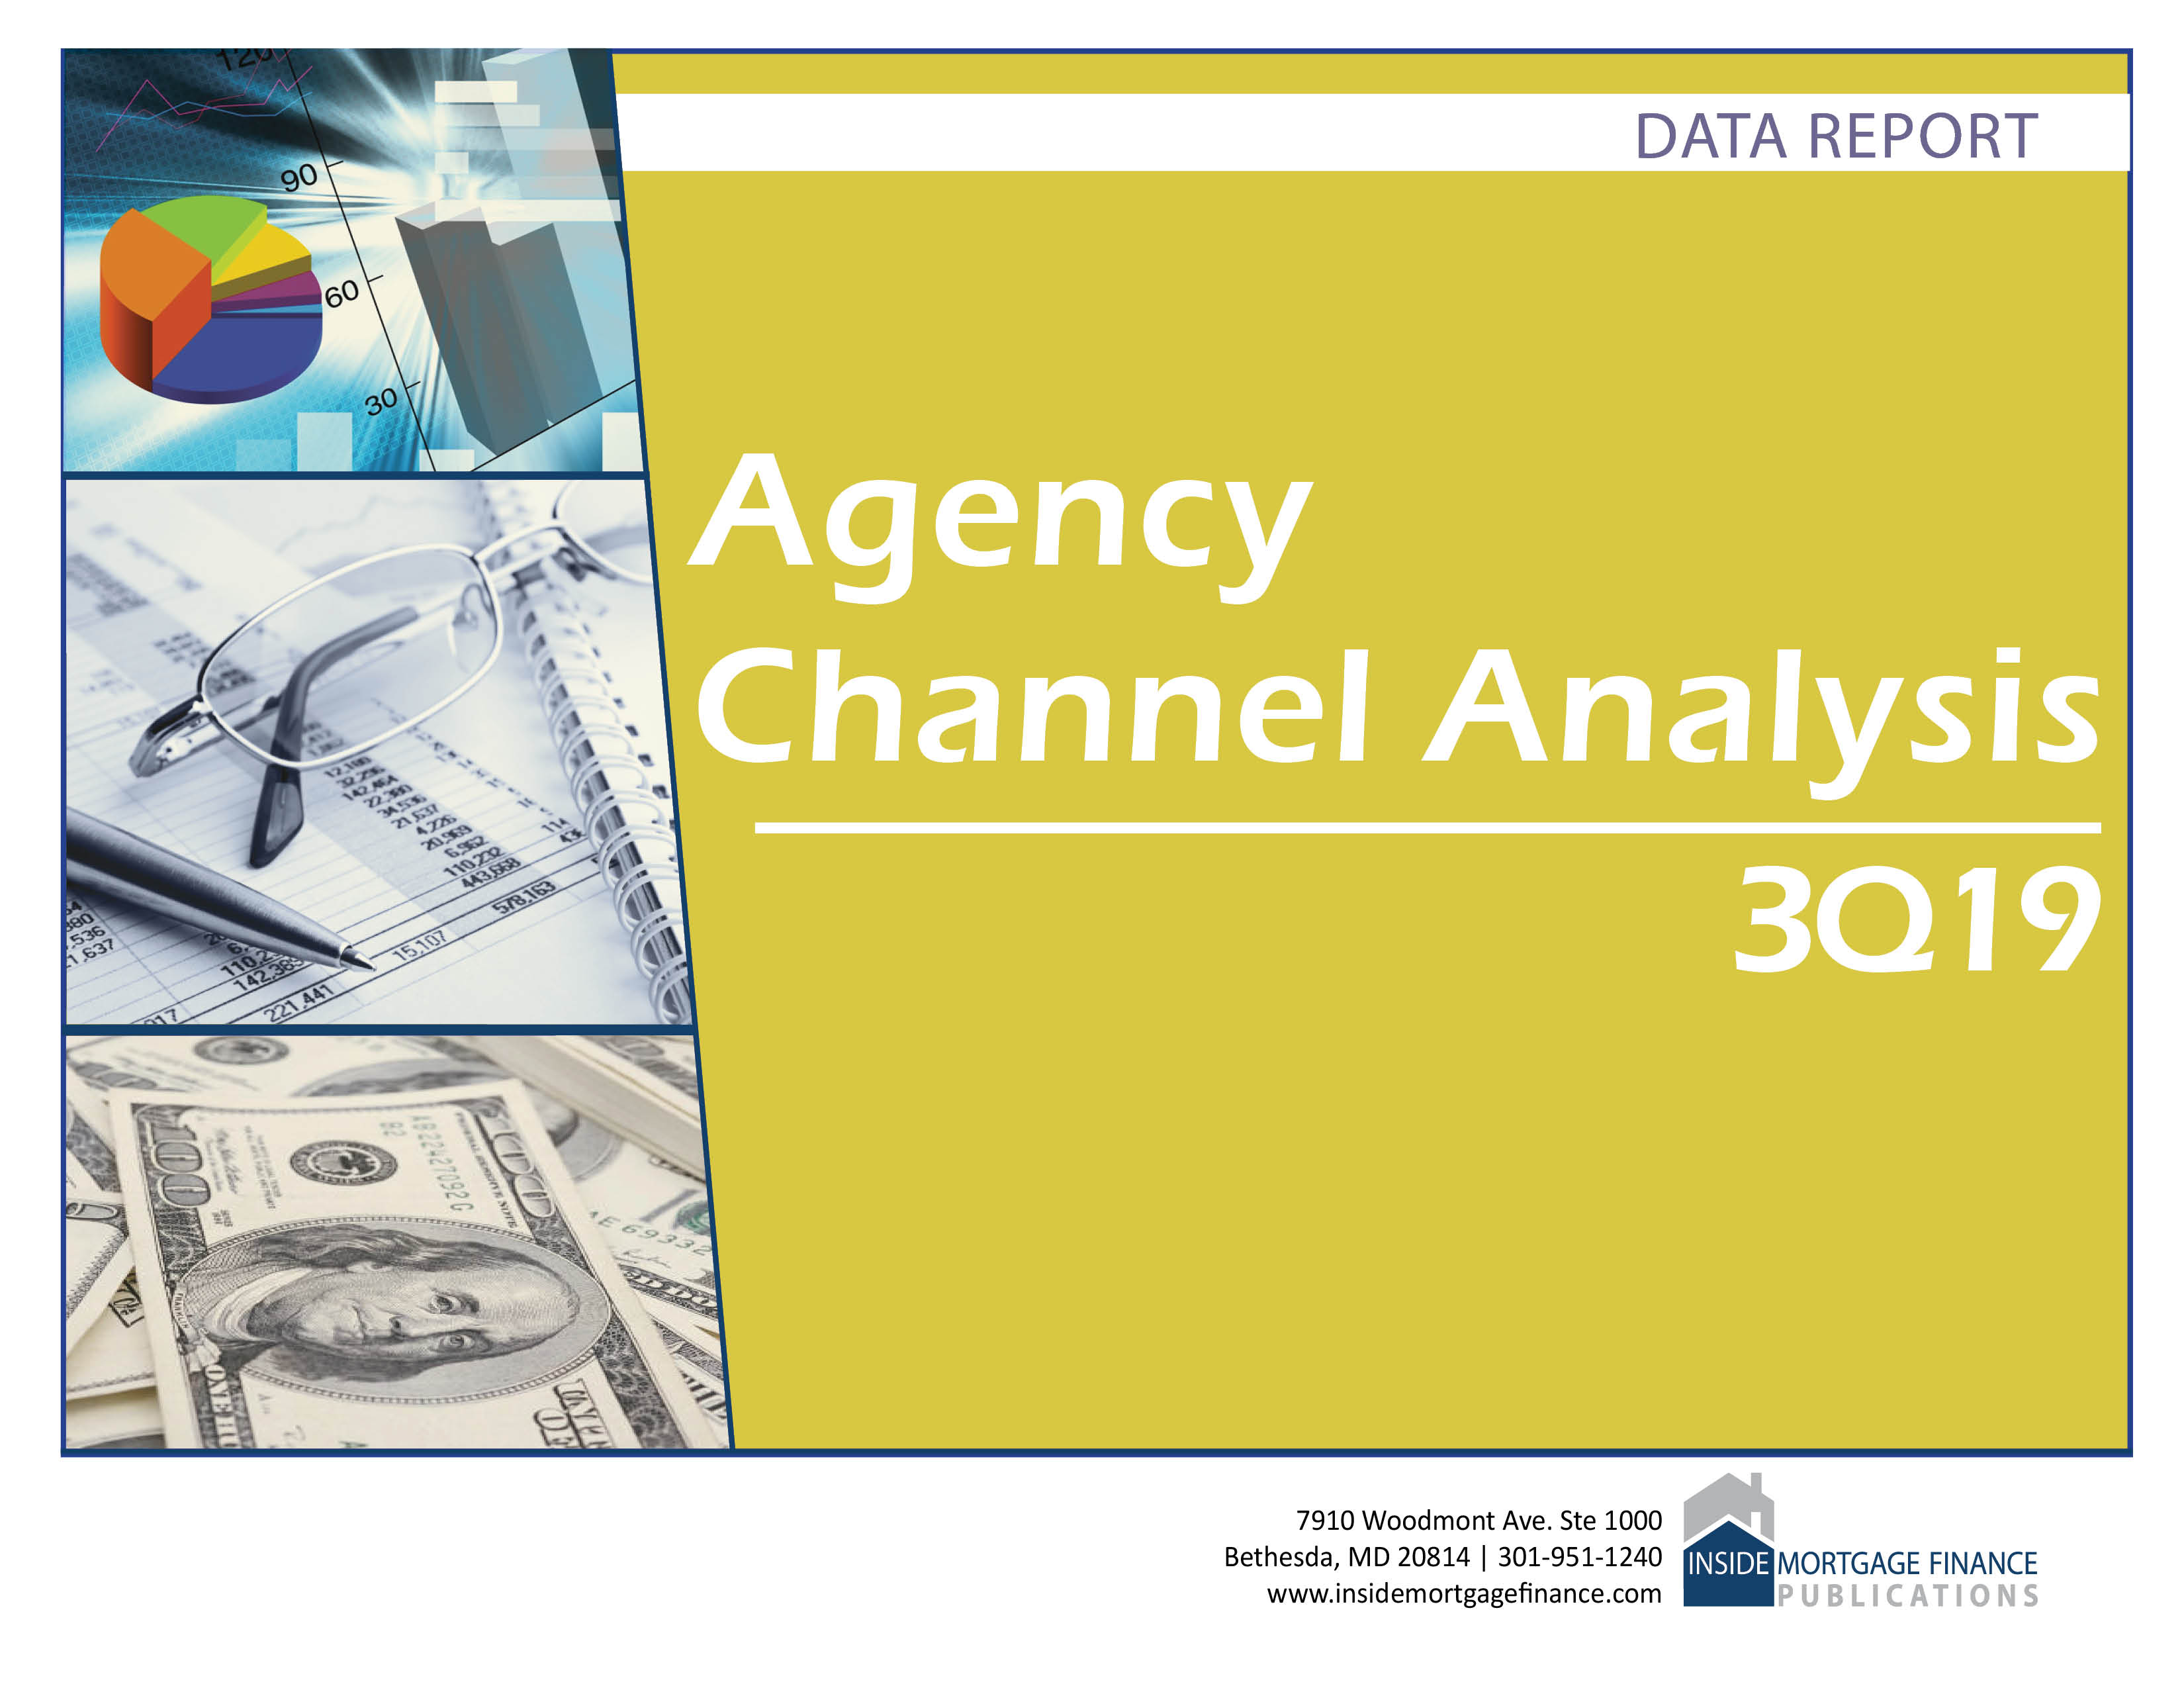 Agency Channel Analysis: 3Q19